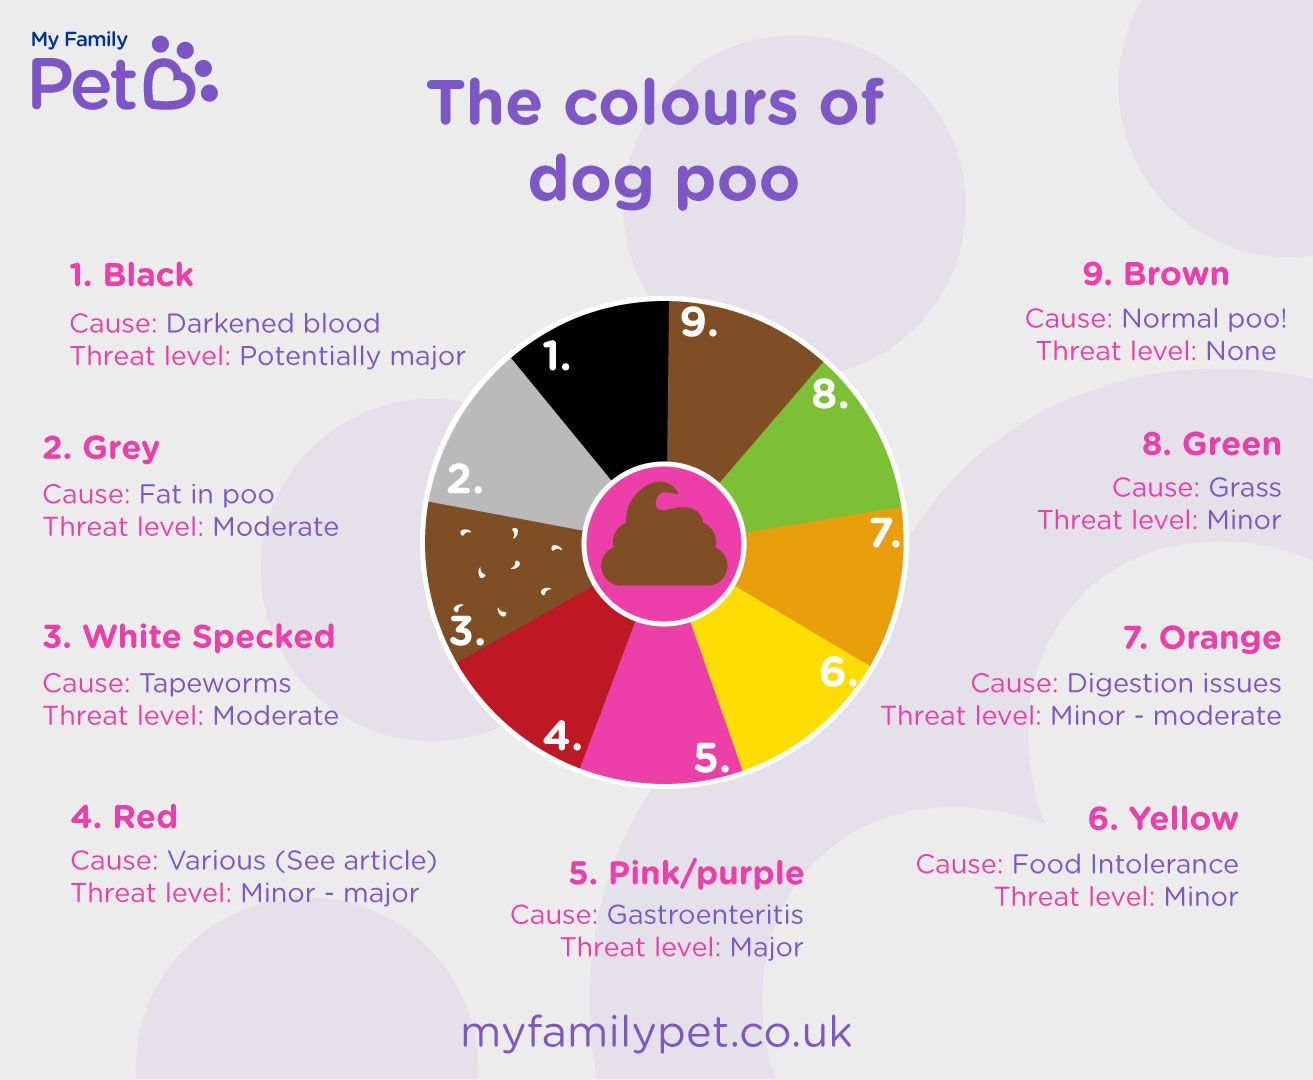 Shows a colour wheel of poo colours - 1. Black; cause: Darkened blood; threat level: potentially major. 2. Grey; cause: fat in poo; threat level: moderate. 3. White specked; cause: tapeworms; threat: moderate. 4. Red; cause: various (detail in text below); threat level: major-minor. 5. Pink/purple; cause: gastroenteritis; threat level: major. 6. Yellow; cause: Food intolerance; threat level: minor. 7. Orange; cause: digestion issues; threat: minor-moderate.8. Green; cause grass; threat level: minor. 9. Brown; cause normal poo!; threat level: none. 